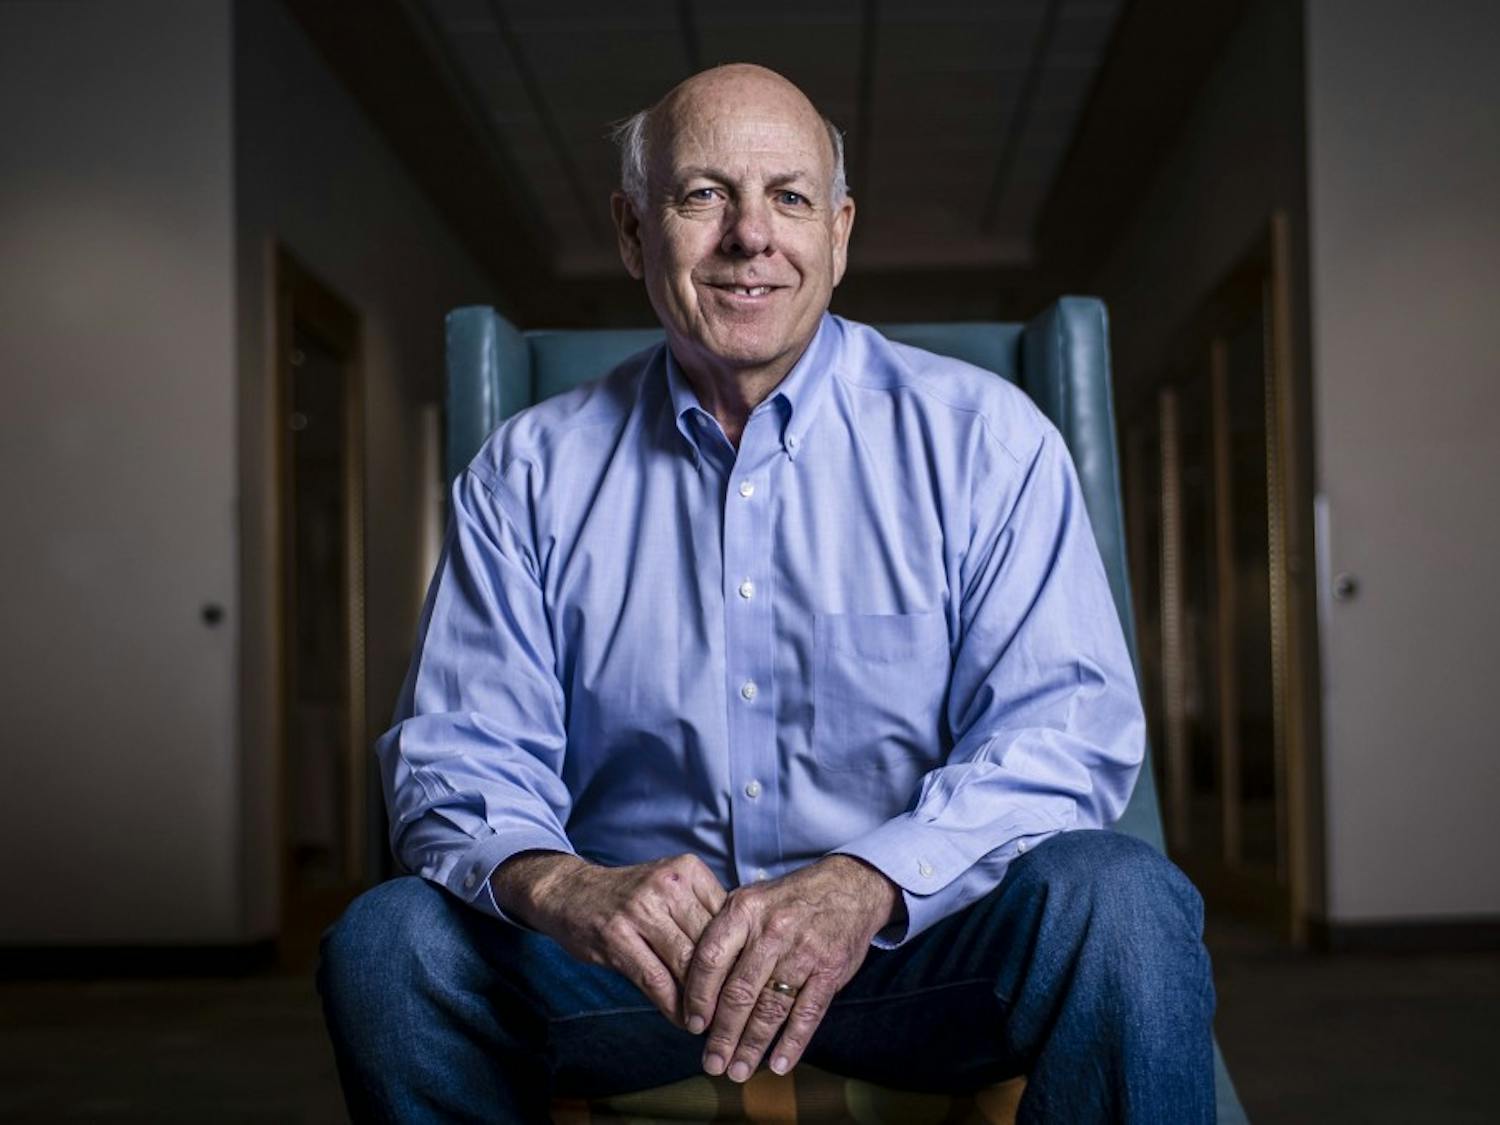 New Mexico gubernatorial candidate Steve Pearce, sits in the student union building for an interview with the Daily Lobo before speaking to the college republicans Saturday, Dec. 09, 2017. Pearce currently represents New Mexico as a United States representative for New Mexico?s 2nd congressional district -- a seat he won in 2010.
